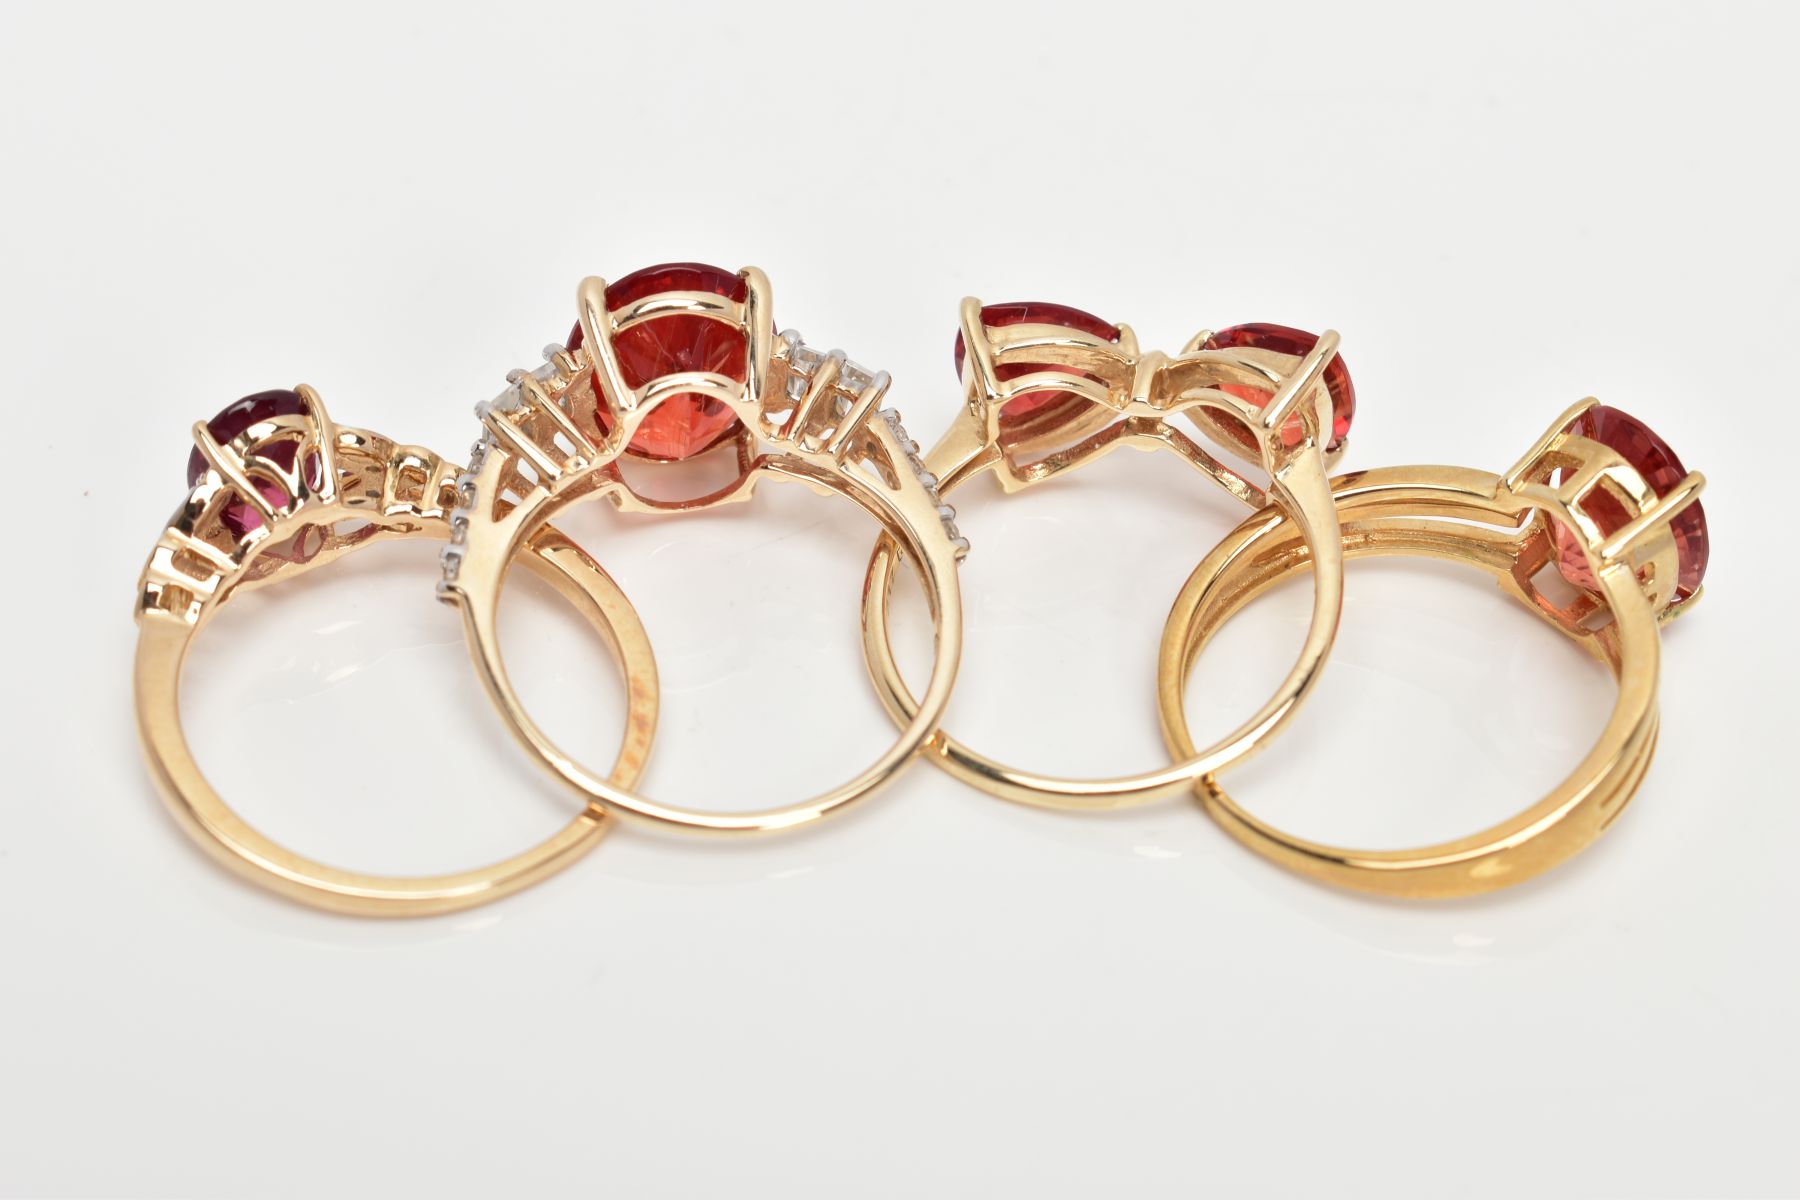 FOUR 9CT GOLD GEM SET RINGS, each set with orangish red stones, assessed as garnet and Oregan - Image 3 of 3